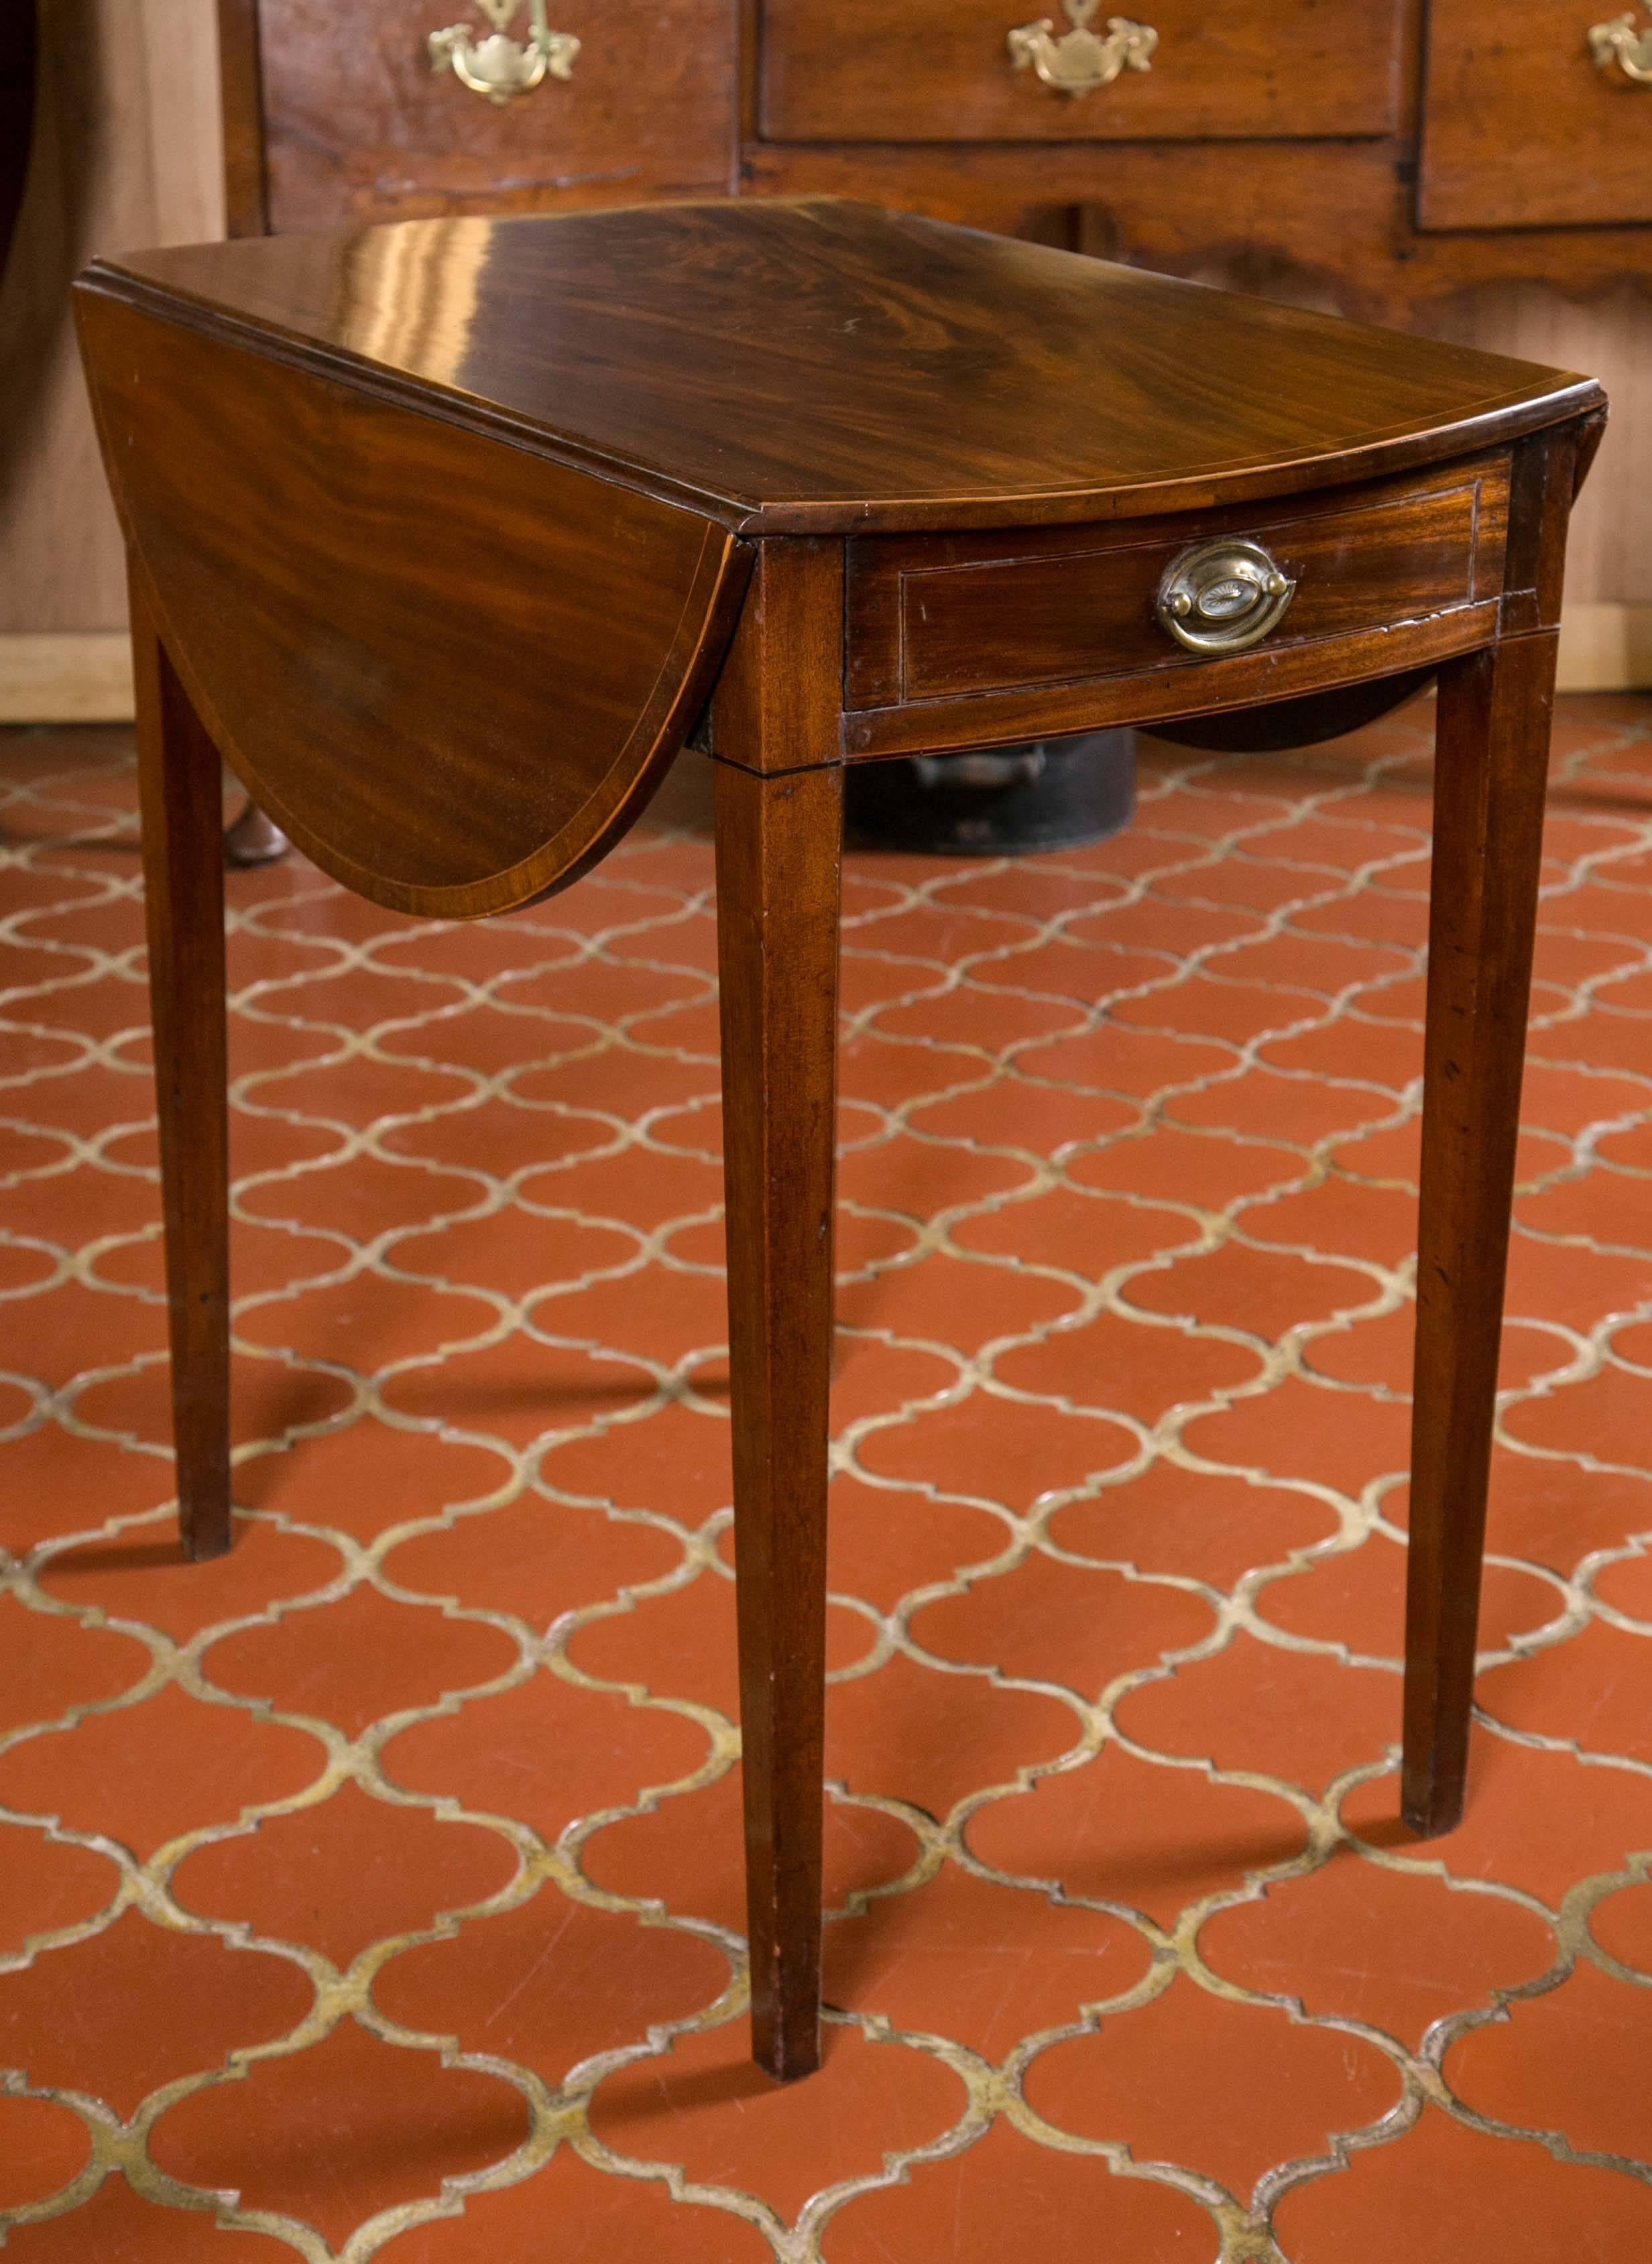 Georgian period mahogany and crossbanded Pembroke table. Crossbanded and string inlaid top and rounded twin flaps above a single drawer with crossbanding and inlay supported by square tapered legs. Each flap is 8.75 in.